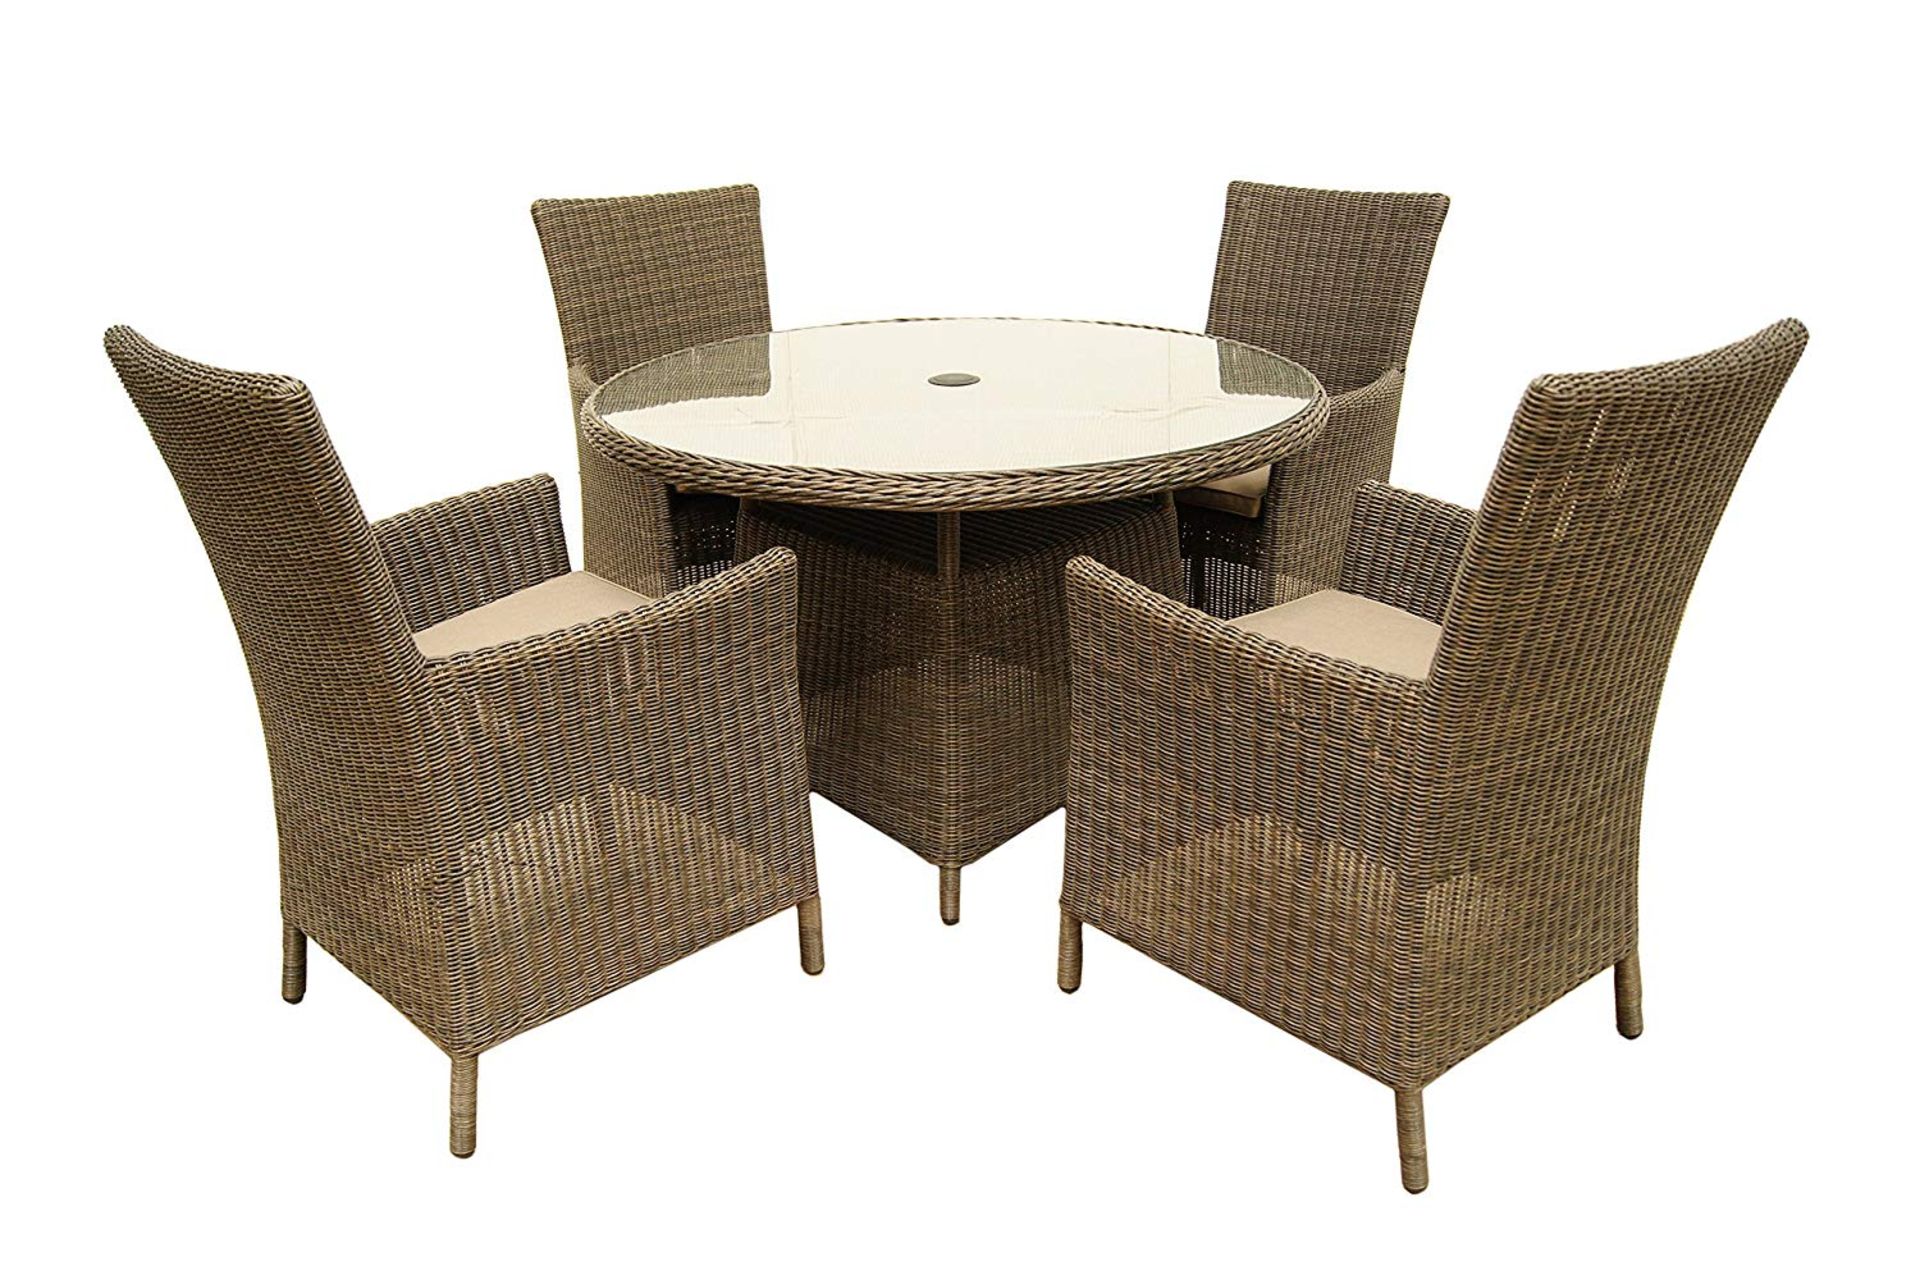 V Brand New St Tropez 120cm Round Four Seater Table With Four Carver Chairs Inc Sahara Cushion